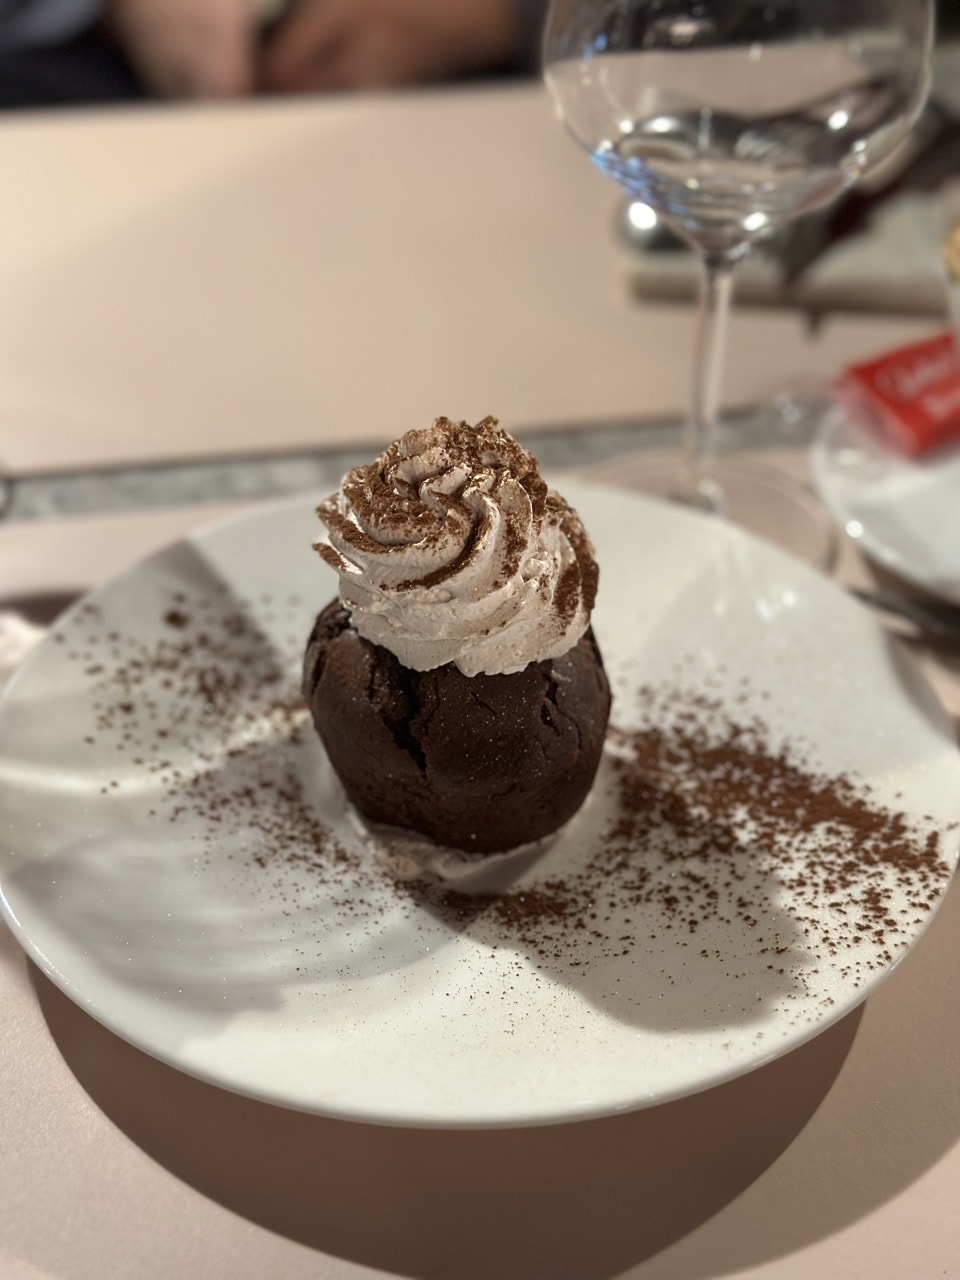 Chocolate mousse with a dollop of cream